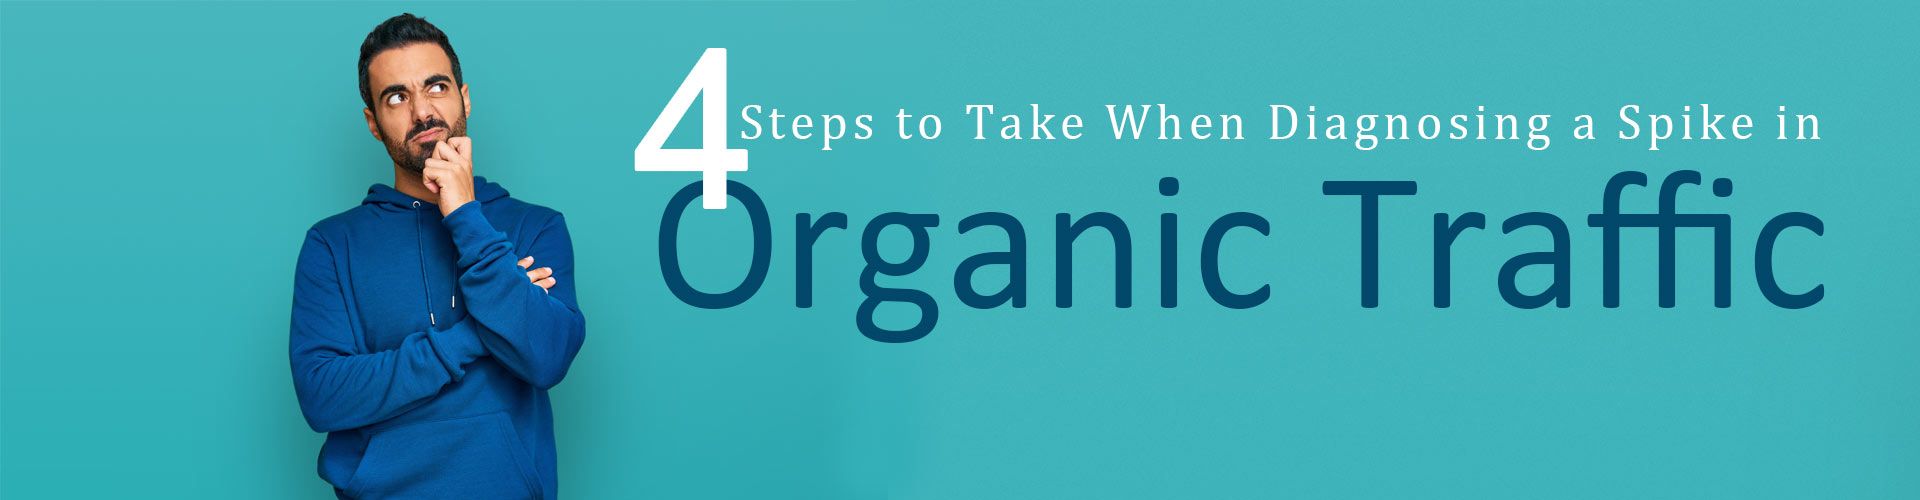 4 steps to take when diagnosing a spike in organic traffic